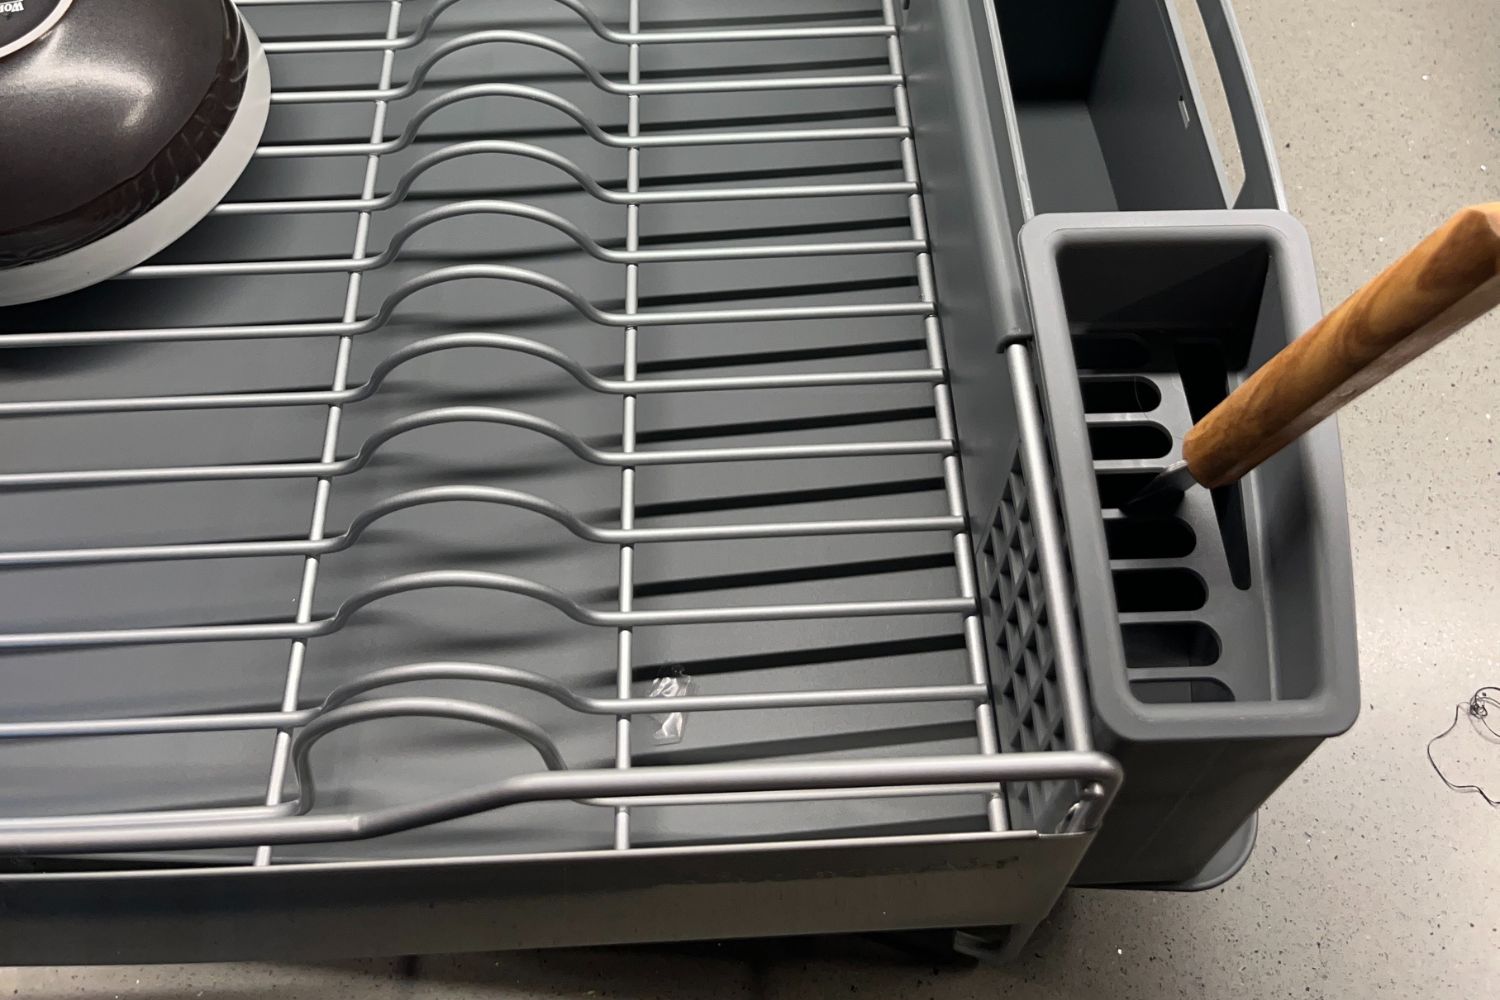 The individual dividers of the KitchenAid full-size dish-drying rack and utensil holder.